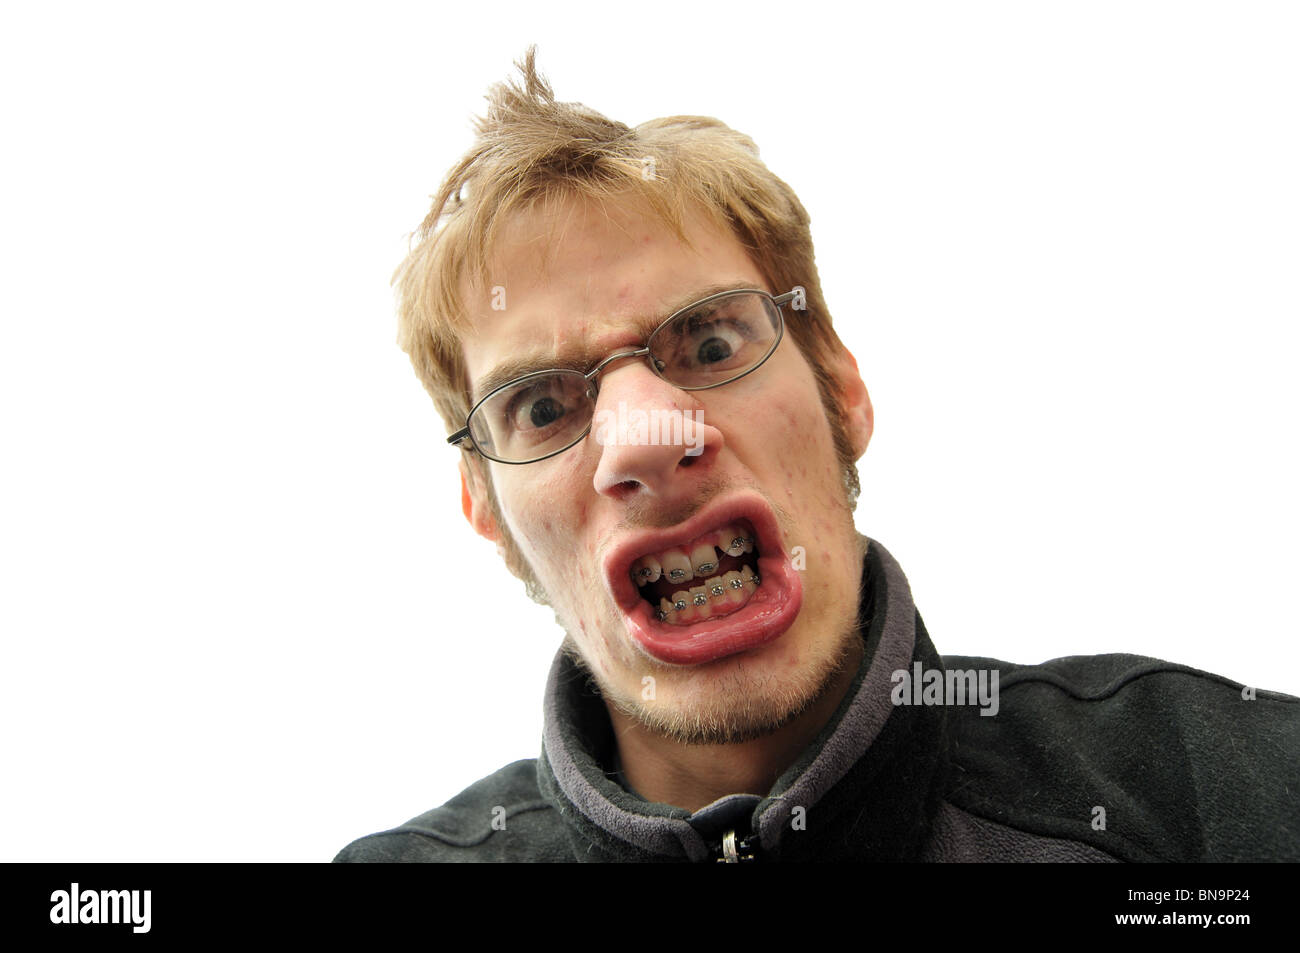 Mean man with braces isolated on white Stock Photo